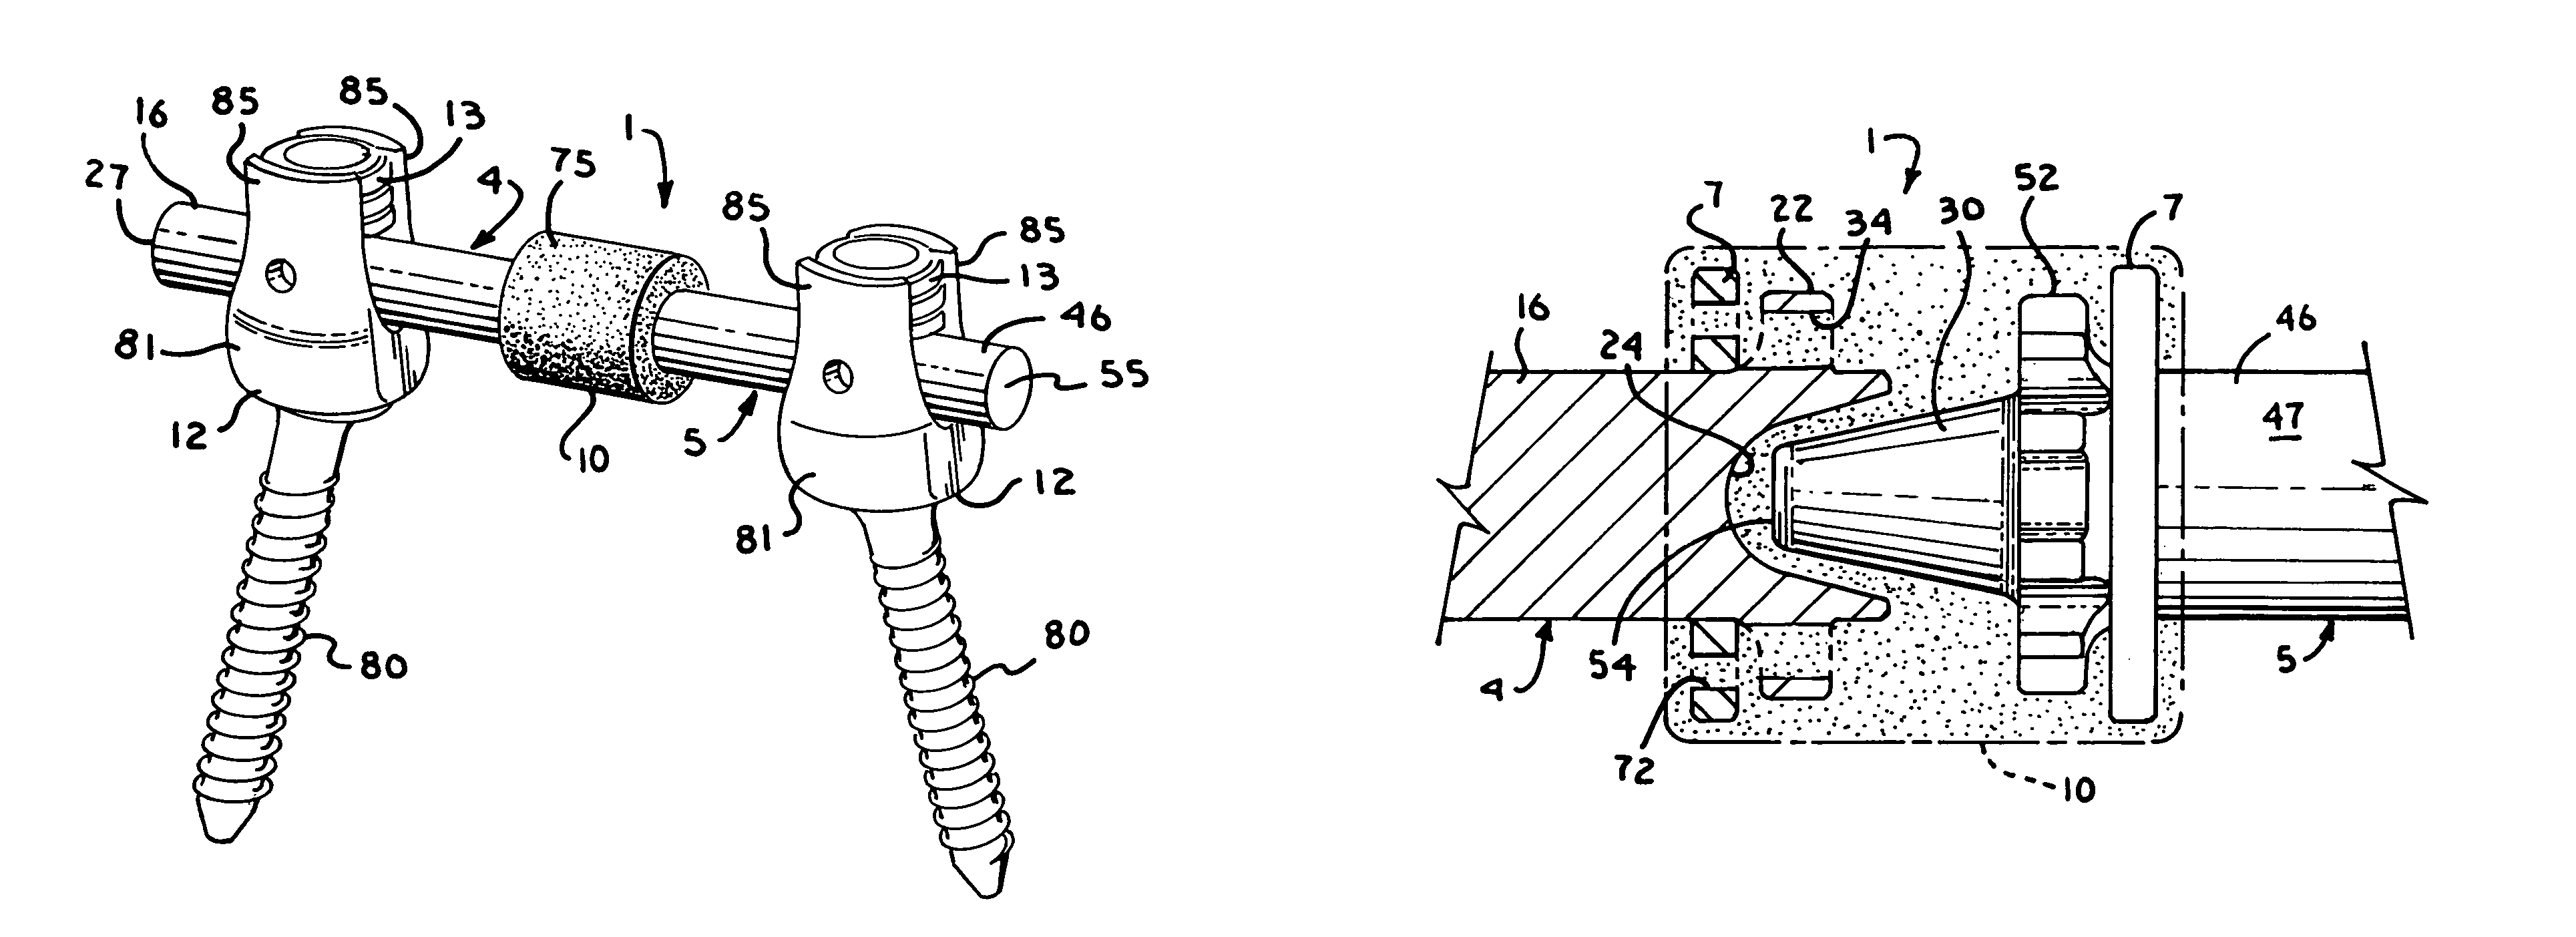 Dynamic stabilization assembly with frusto-conical connection